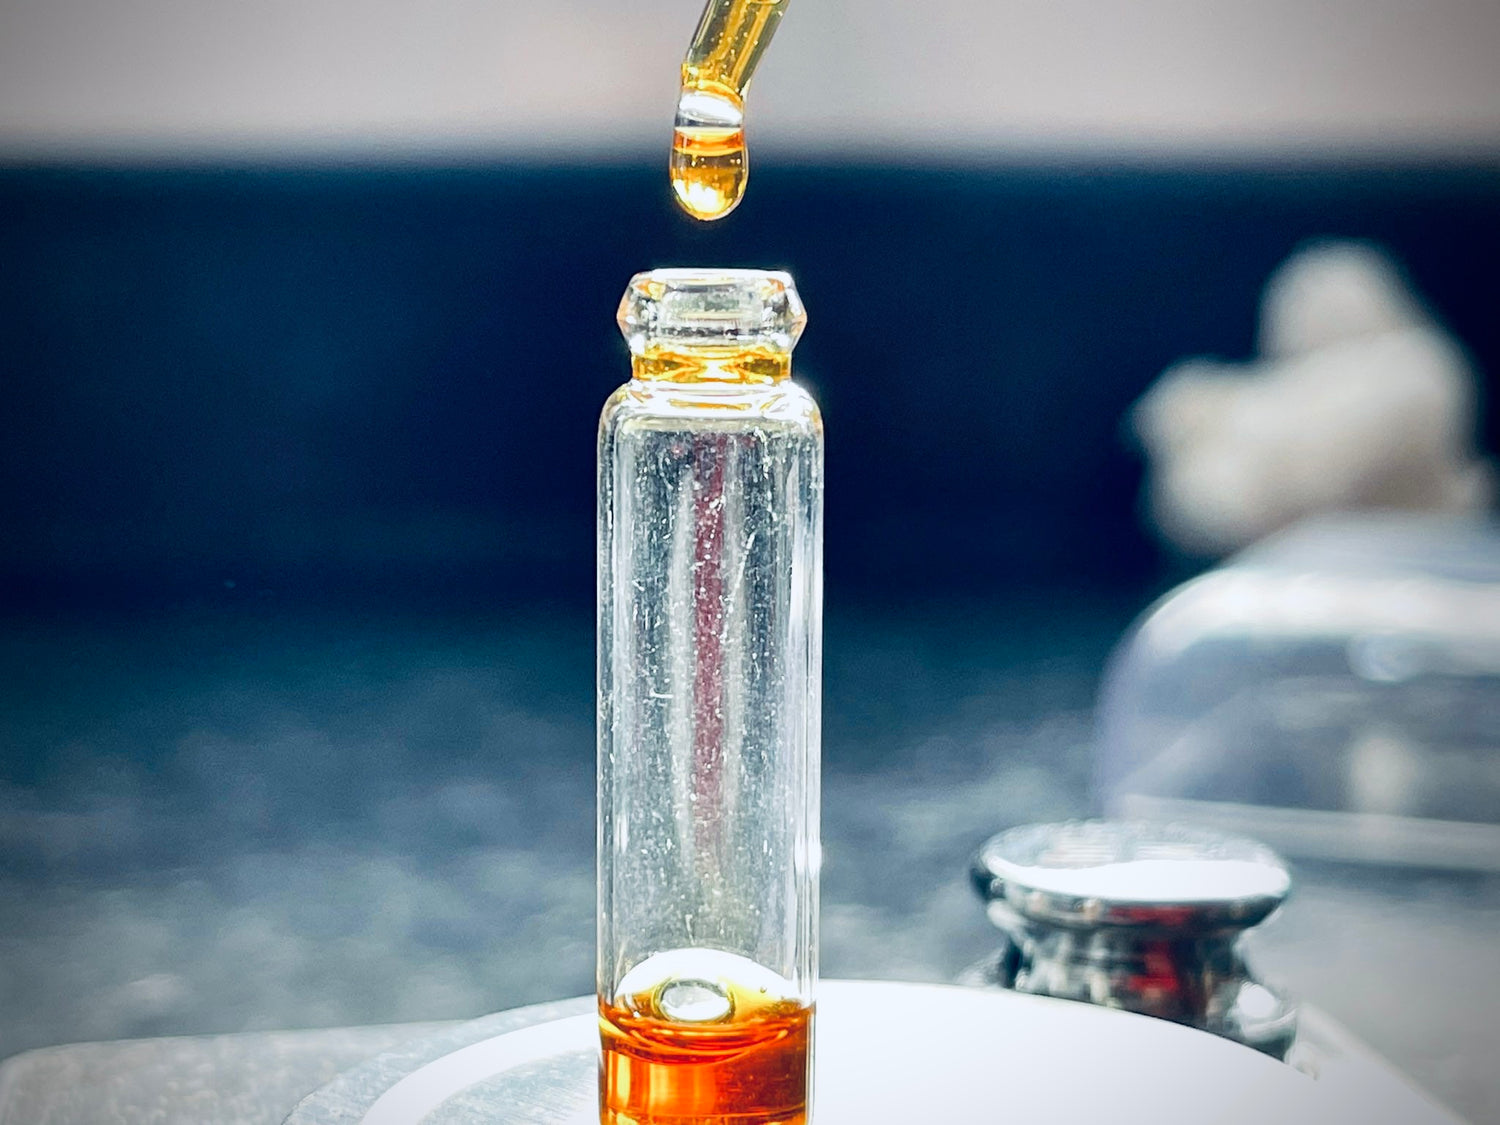 A man filling a vial with Oud oil using a pipette 